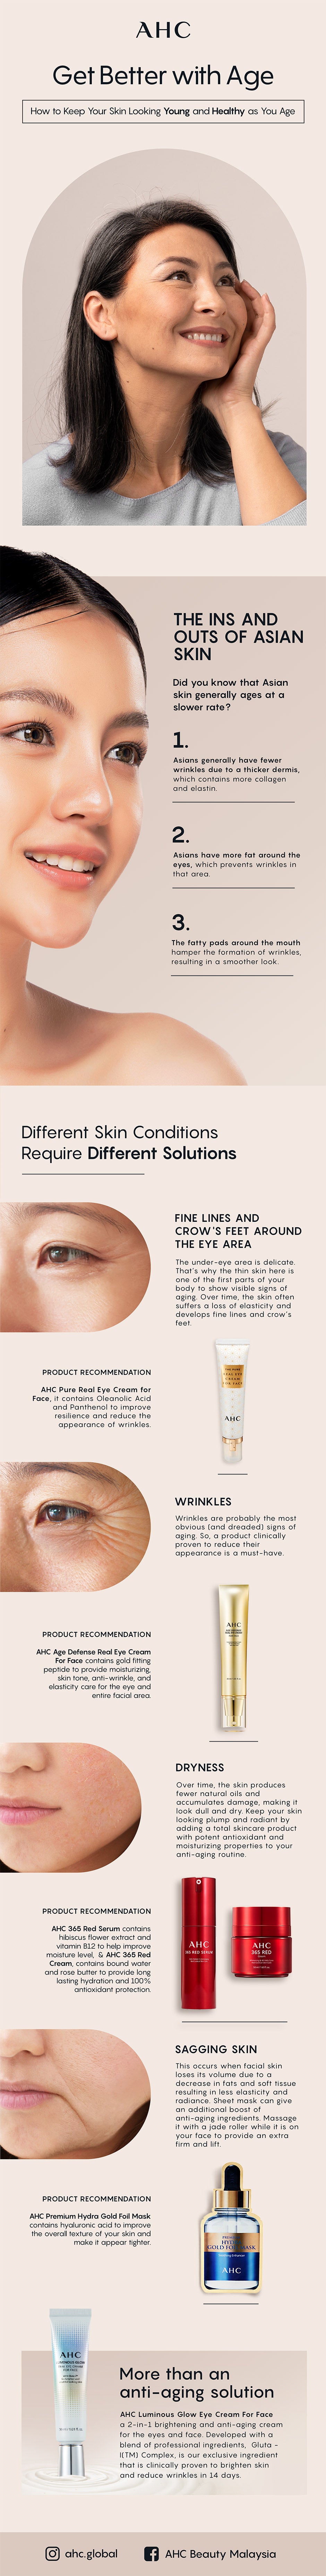 An AHC infographic guide to pick best anti-aging products